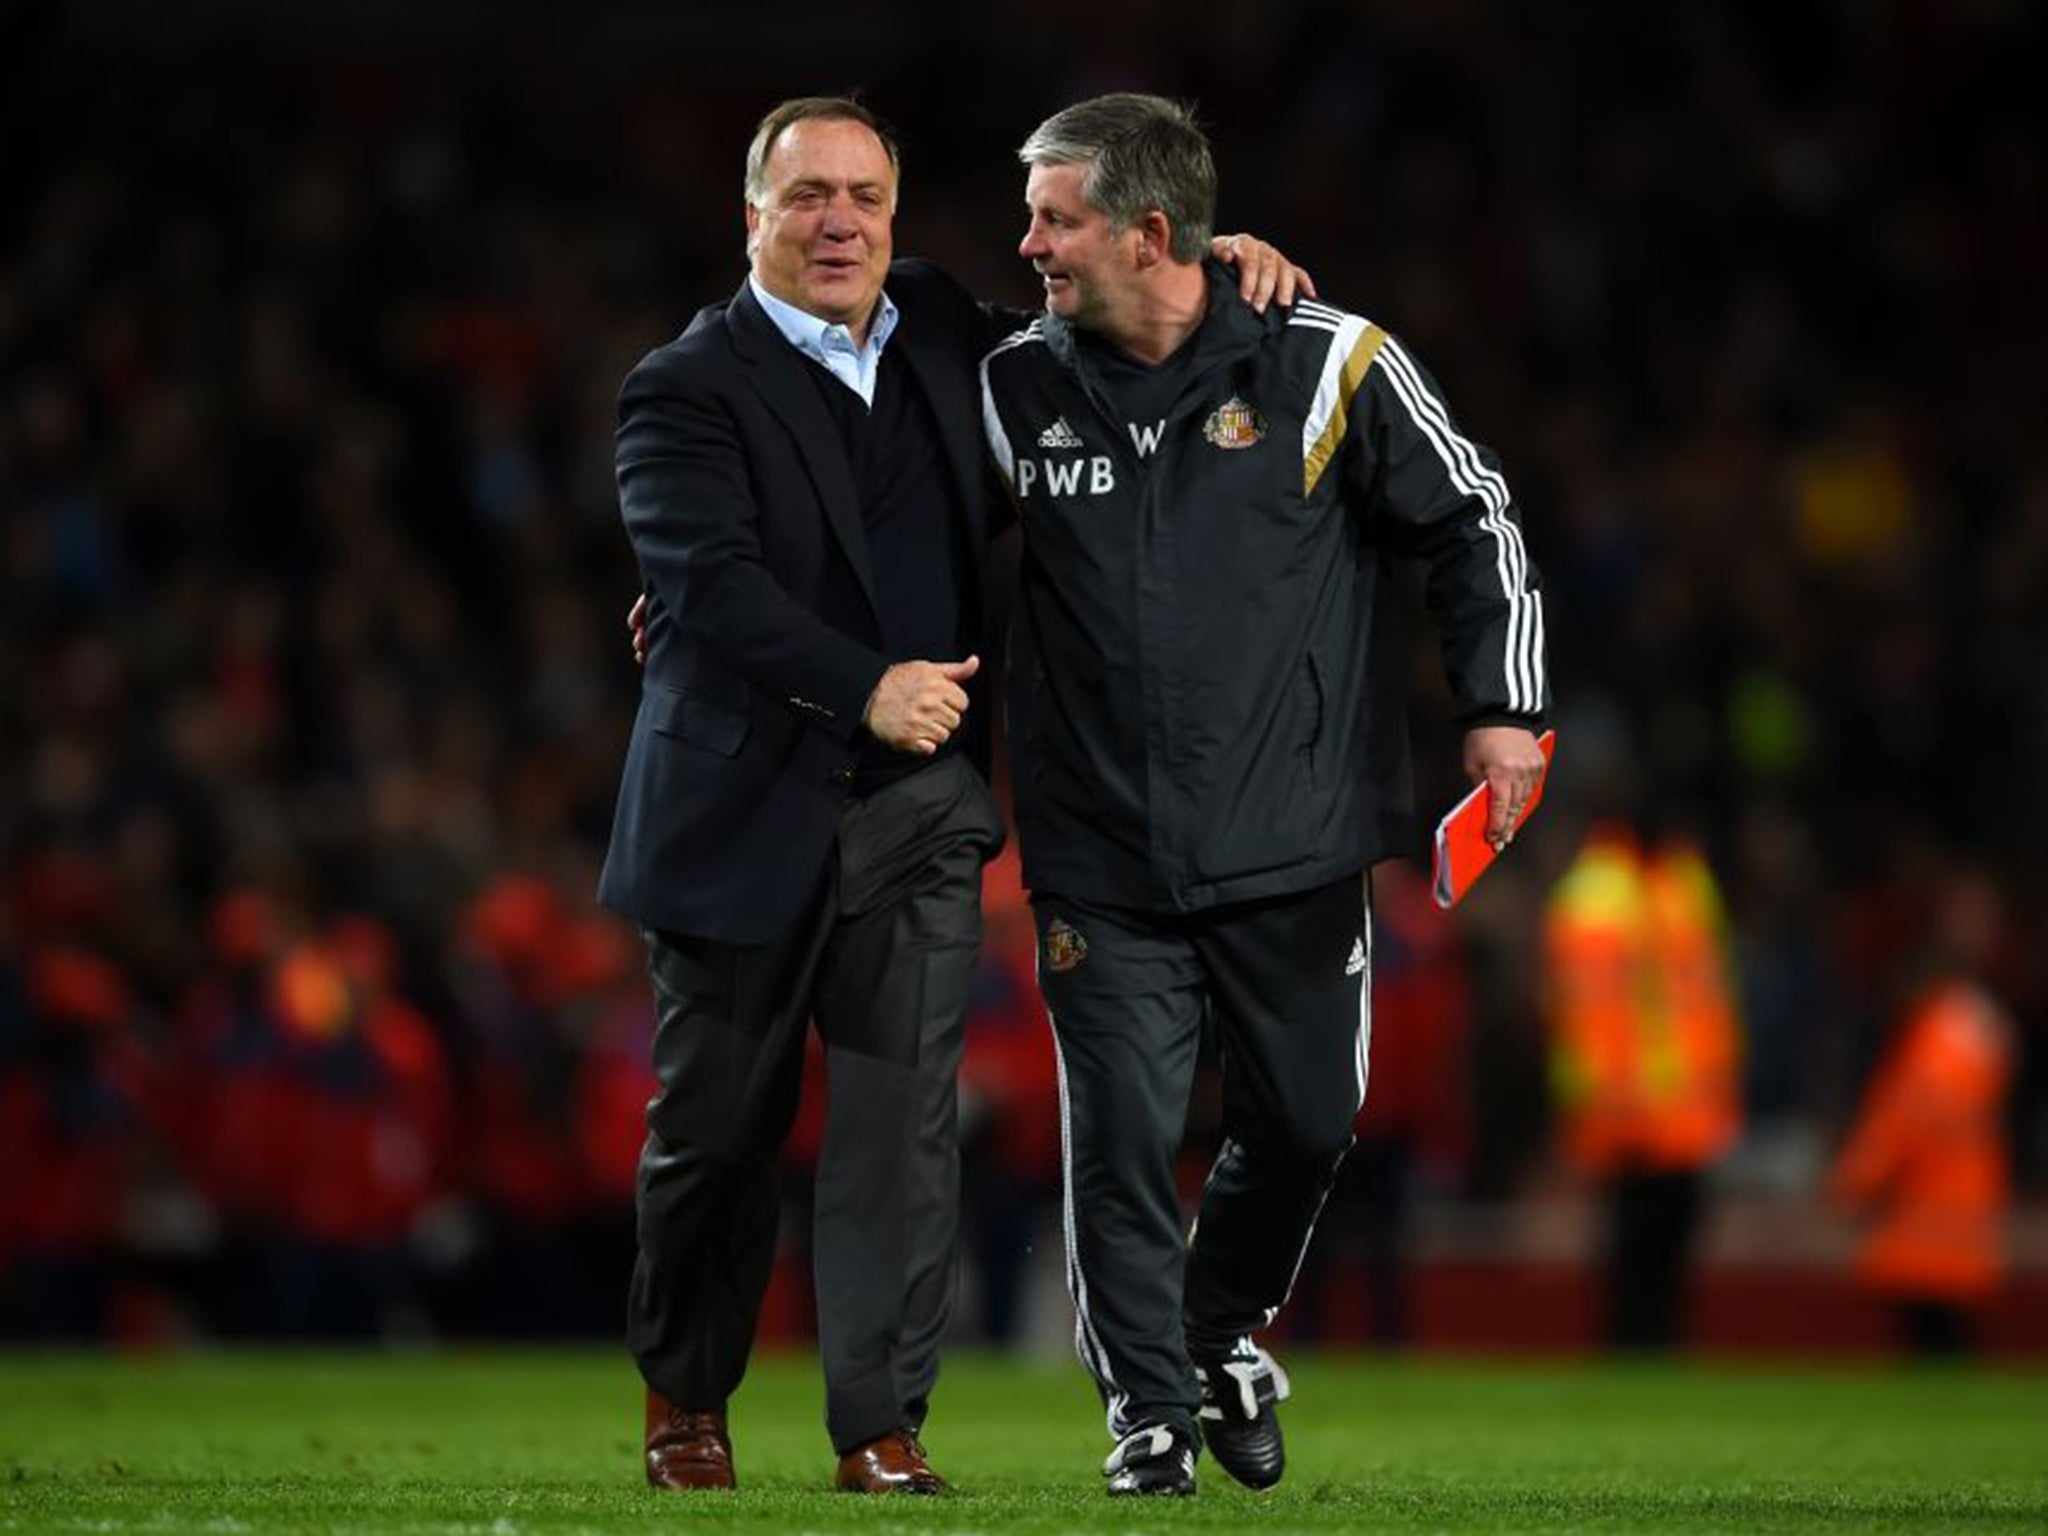 Dick Advocaat, left, celebrates with Sunderland coach Paul Bracewell after securing their Premier League place